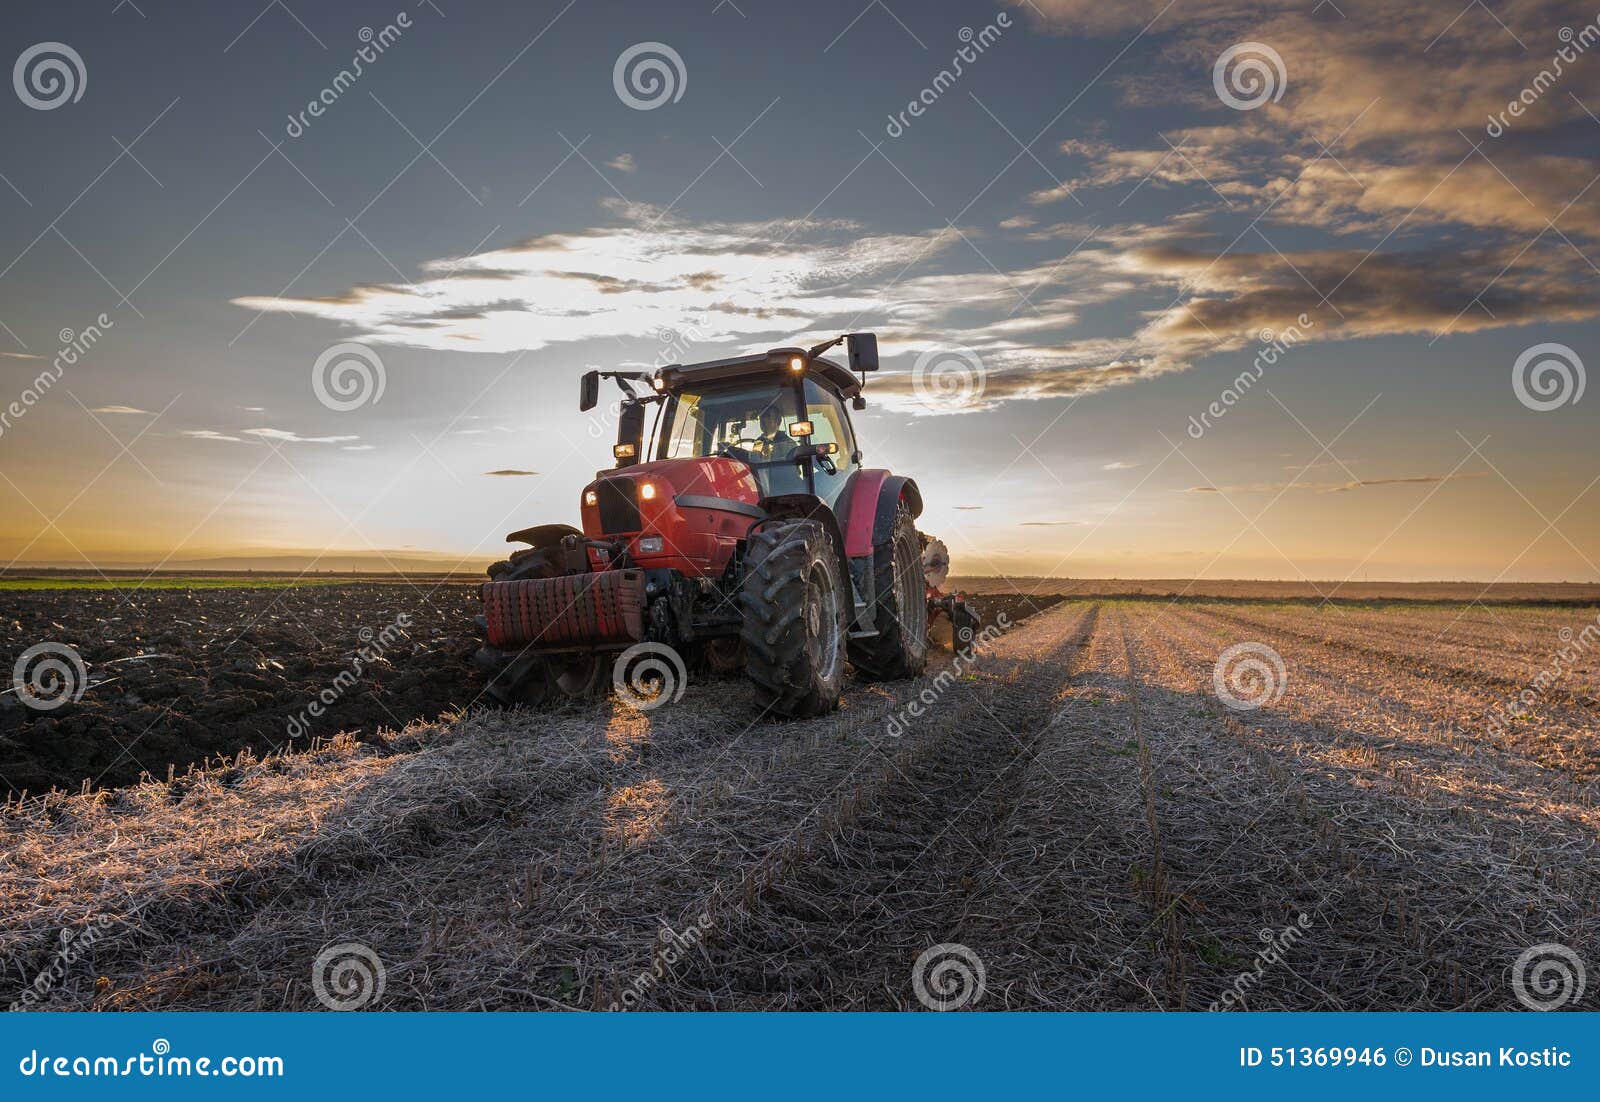 tractor plowing